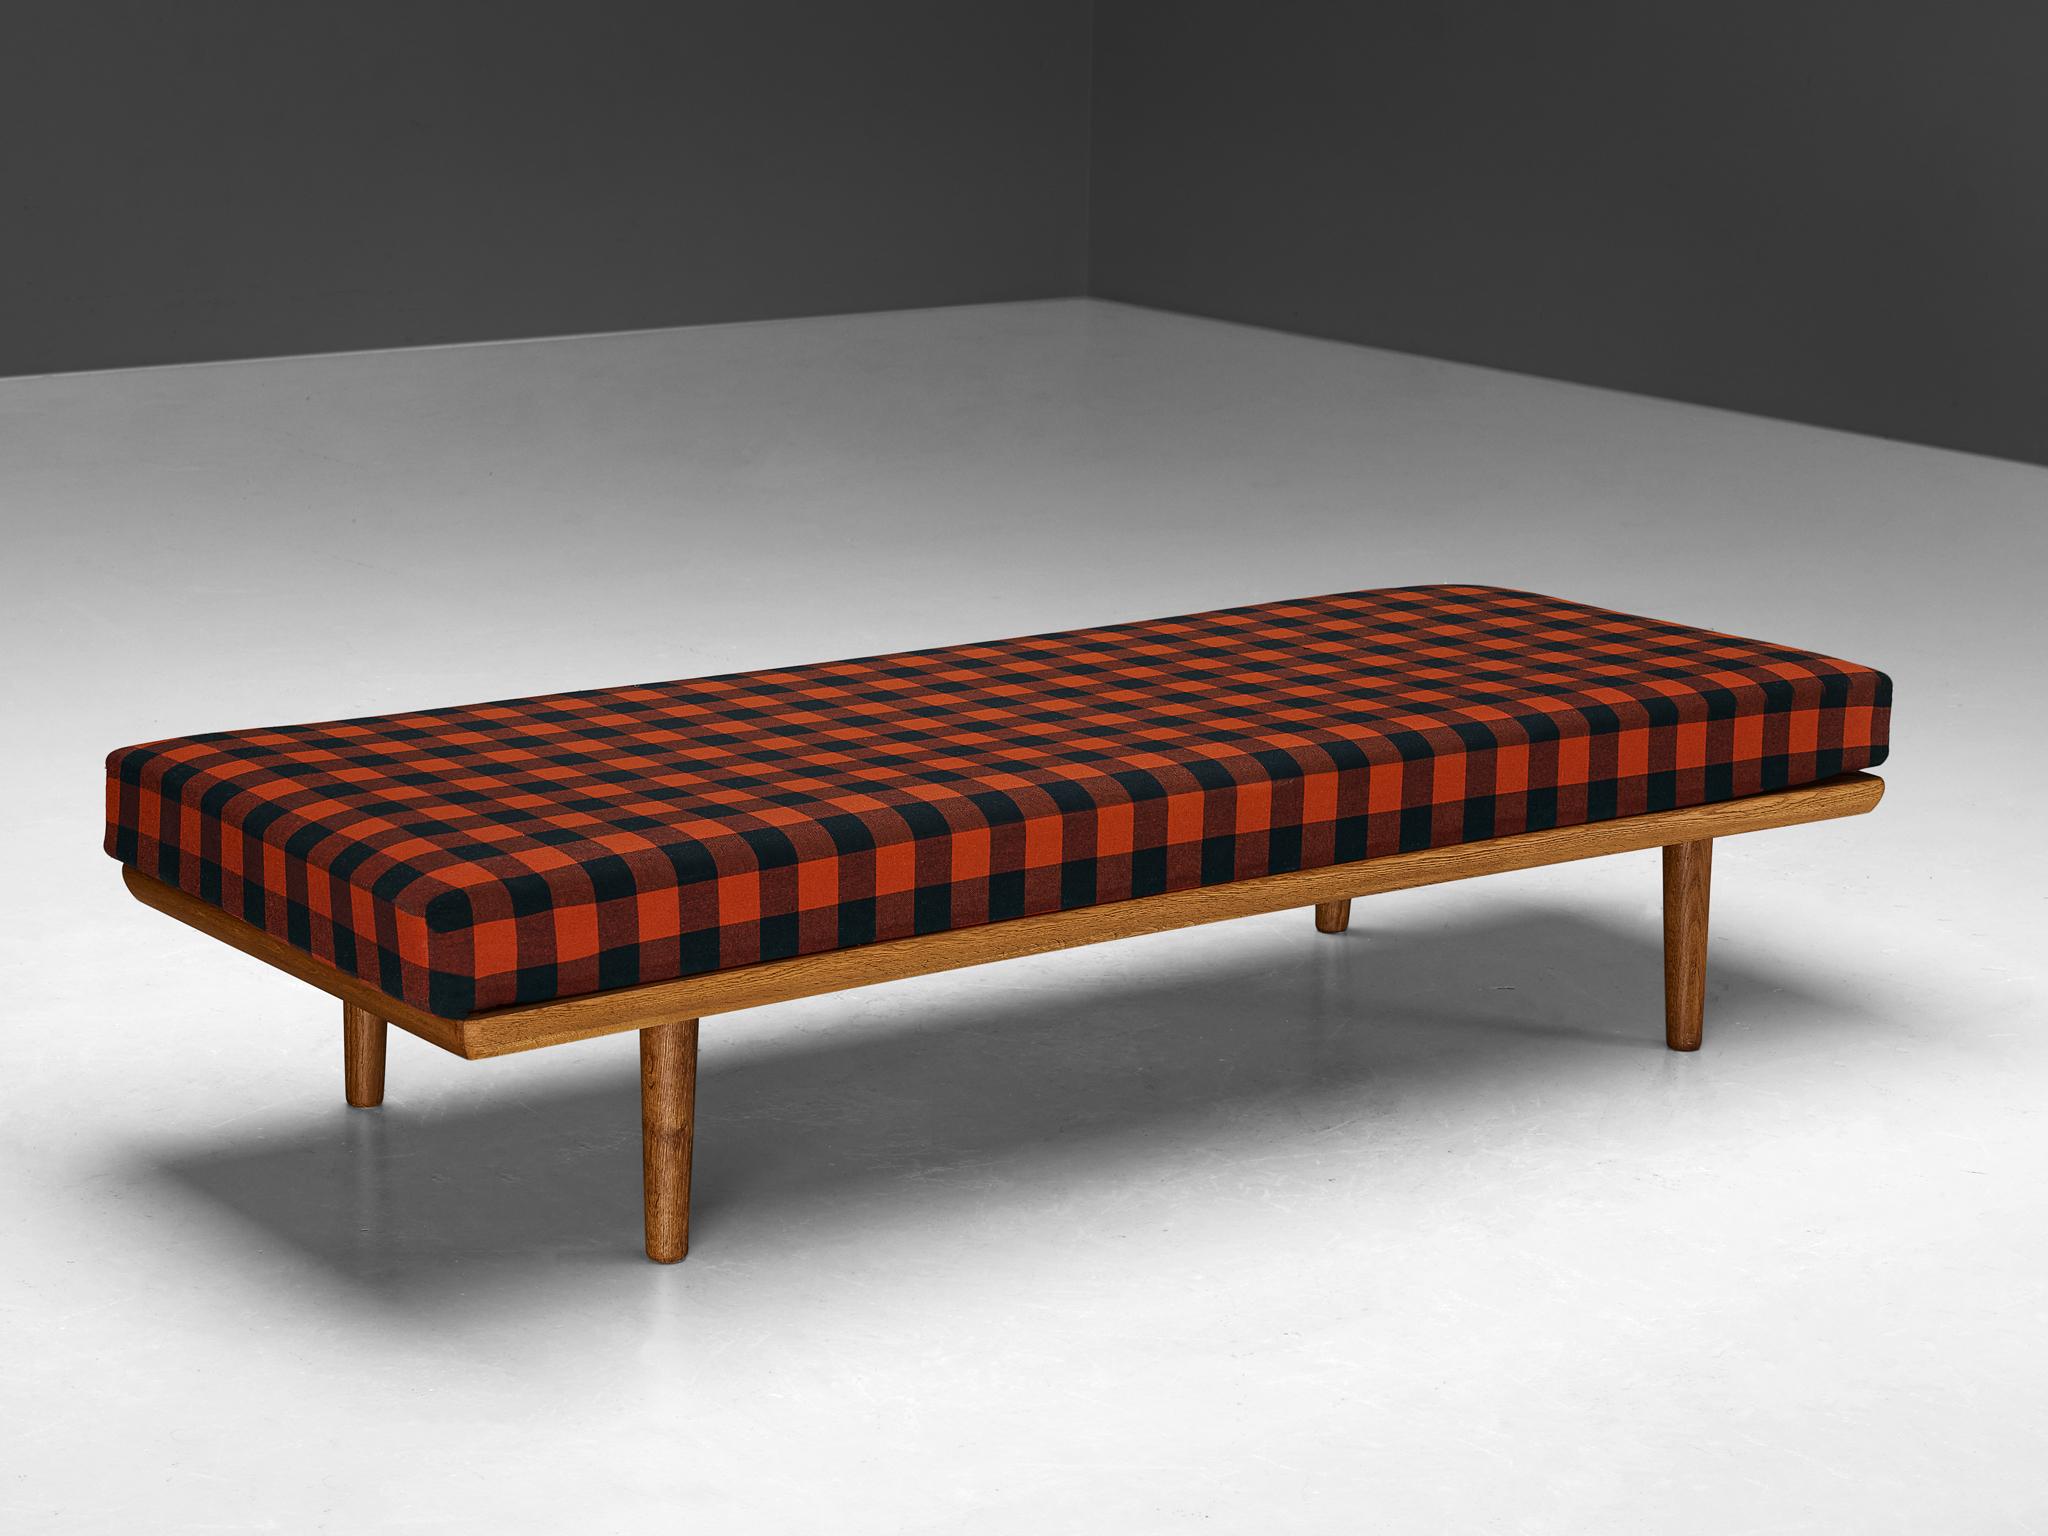 Daybed, oak, teak Scandinavia, 1960s

A simple and minimalist bed manufactured in Scandinavia in the 1960s. A standout fact about this piece is the mattress that is upholstered in a red and black checkered fabric. The construction is based on clear